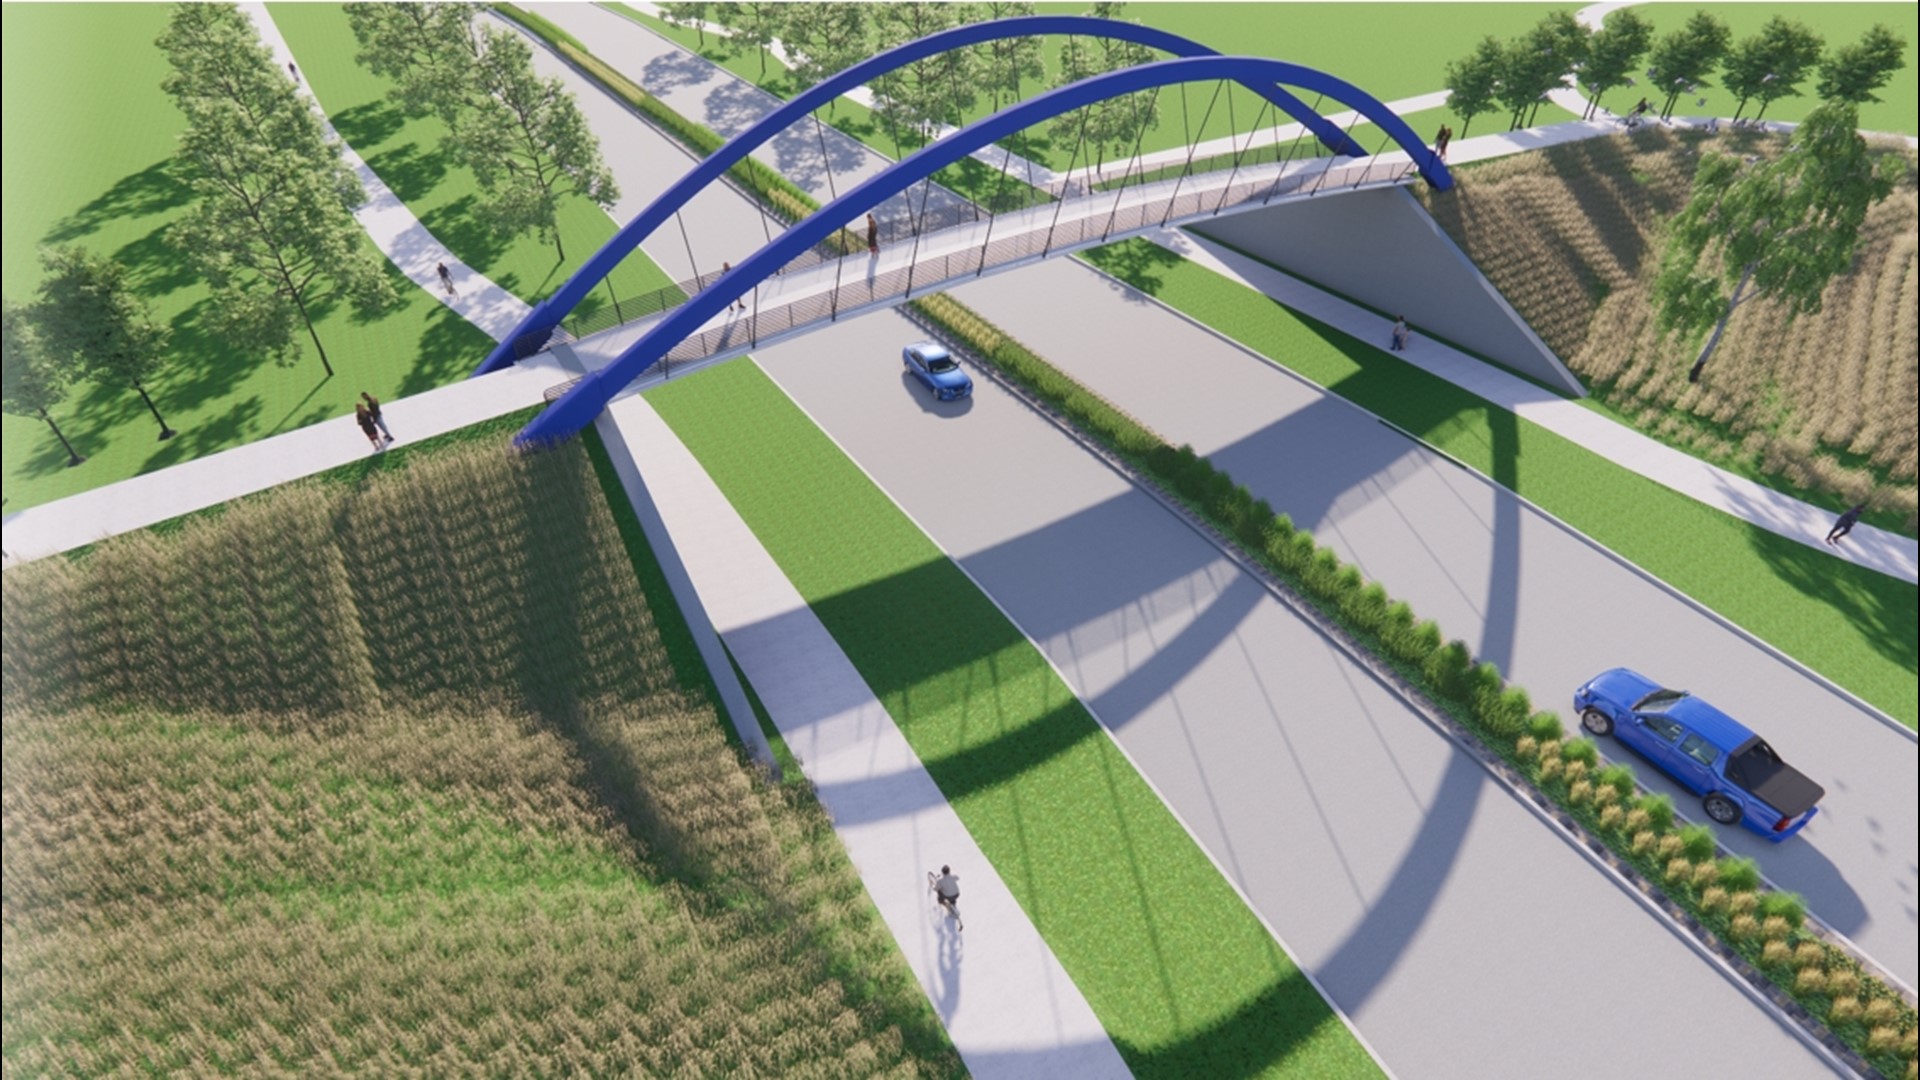 Highlights of Bettendorf's planned 2022 expansion of Forest Grove Drive and Middle Road include a new pedestrian bridge, golf facility and hotel.